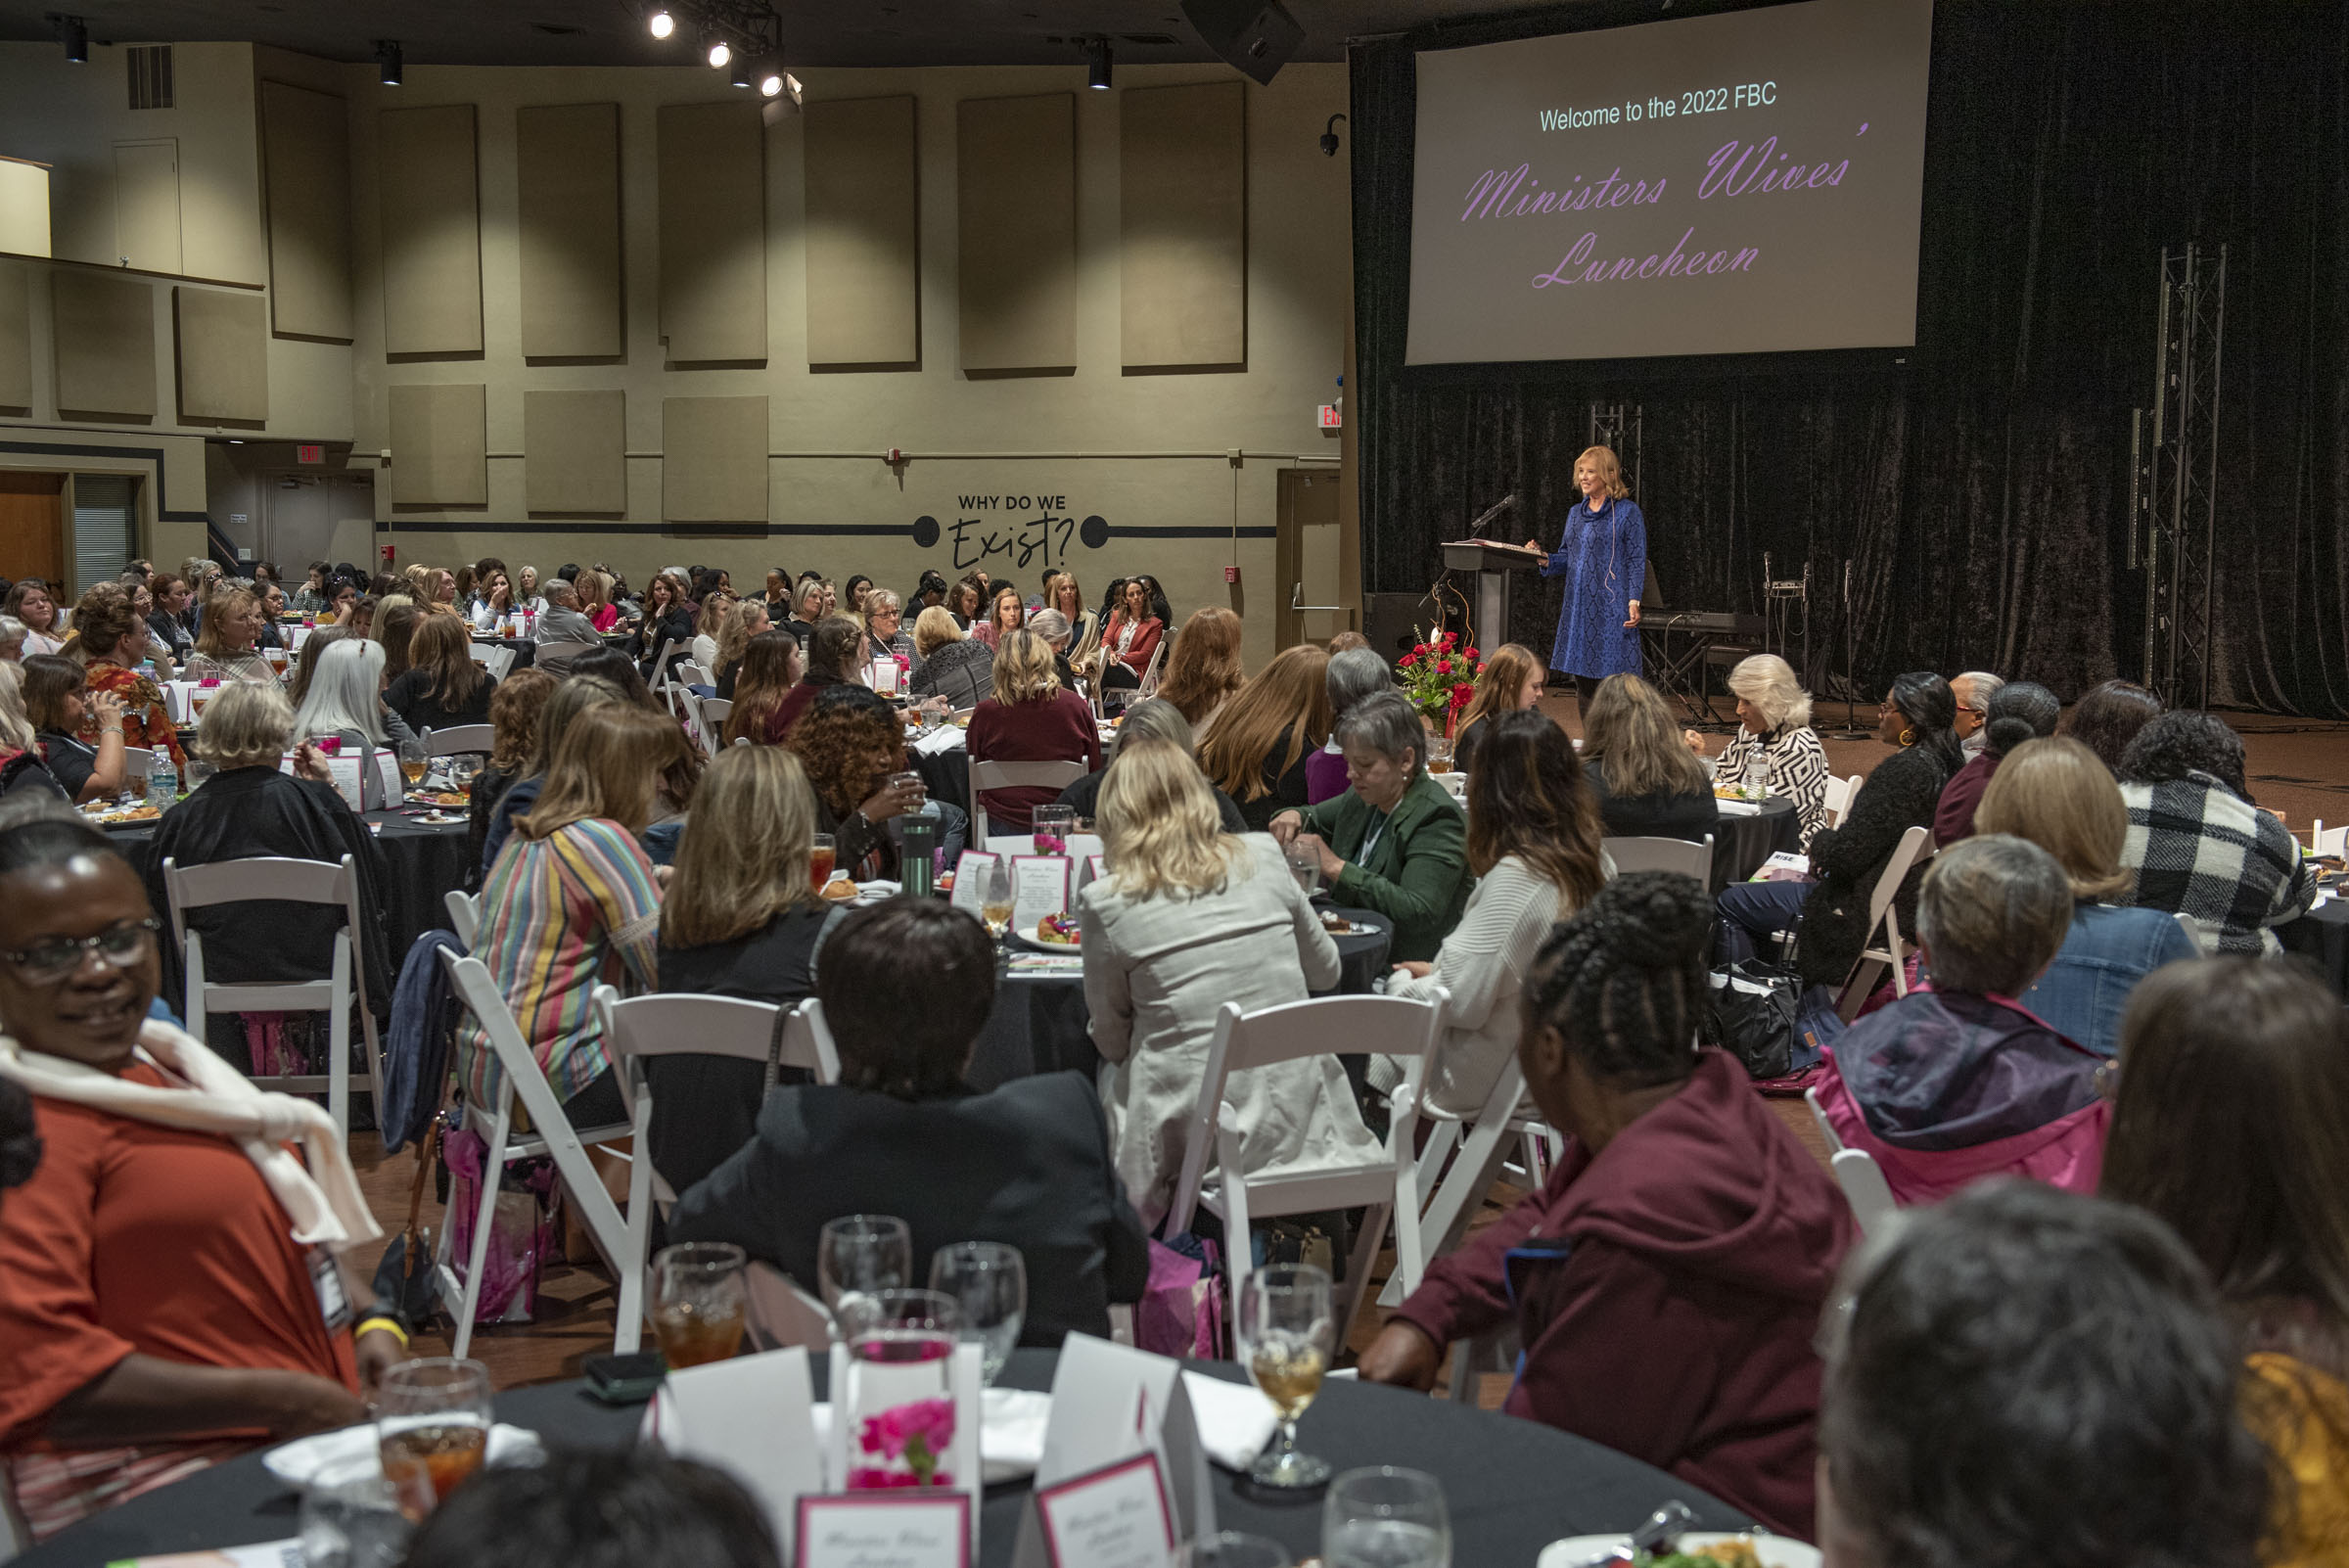 Florida Baptist State Convention, Ministers Wives' Luncheon, Diana Davis